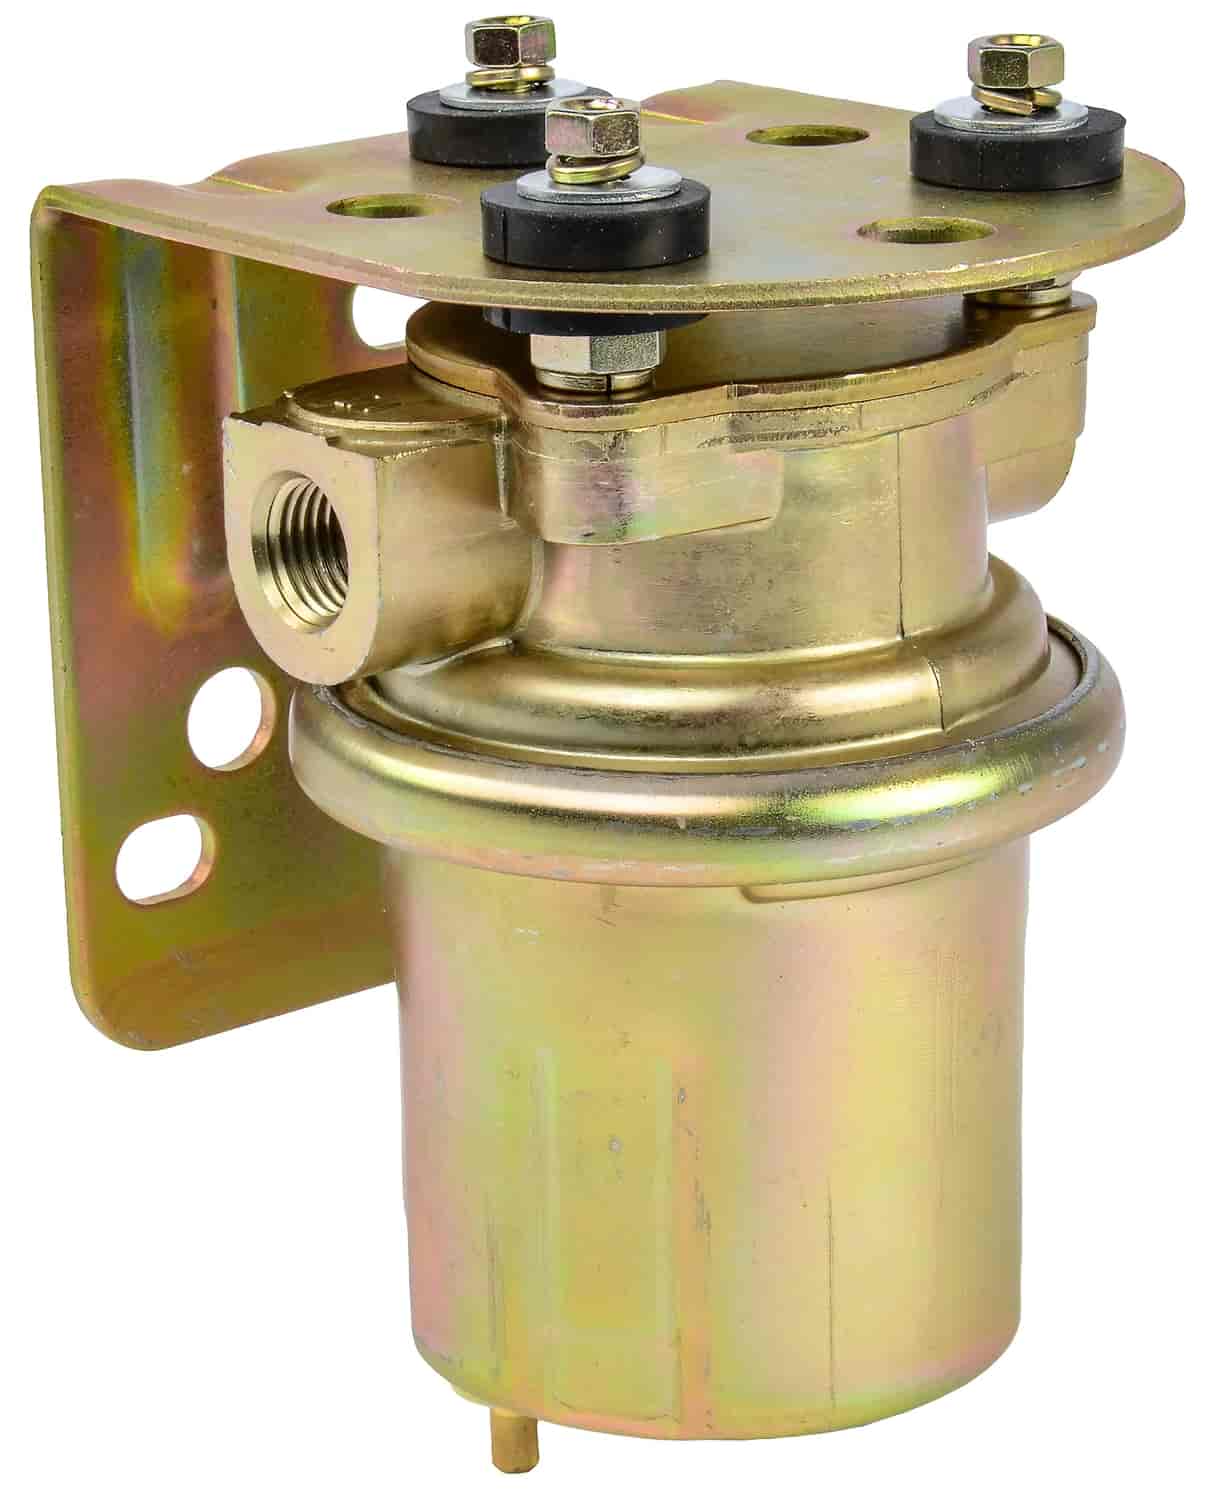 Universal Marine Electric Fuel Pump [72 gph at 6-8 psi Output]